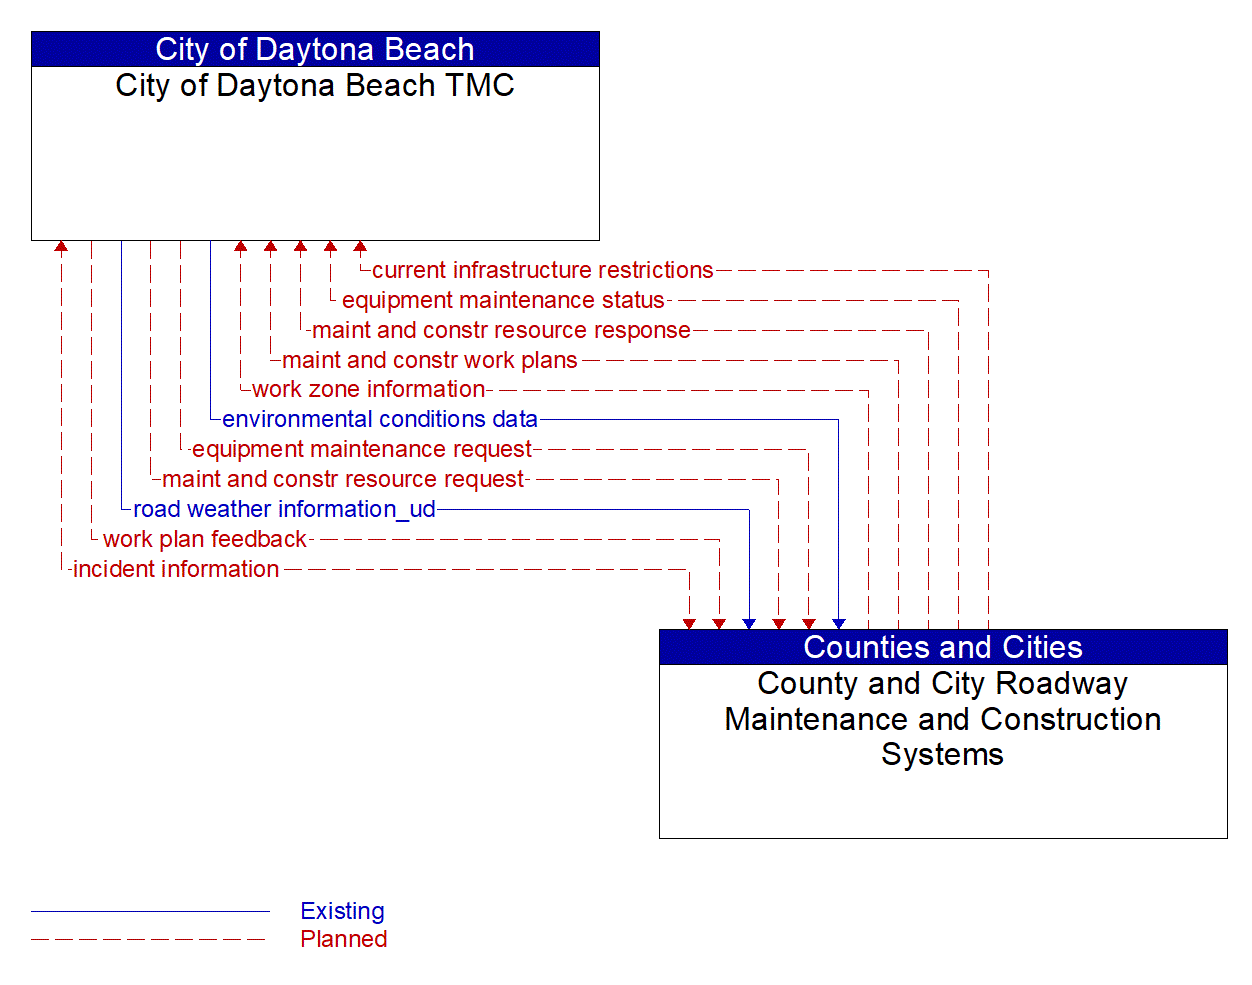 Architecture Flow Diagram: County and City Roadway Maintenance and Construction Systems <--> City of Daytona Beach TMC